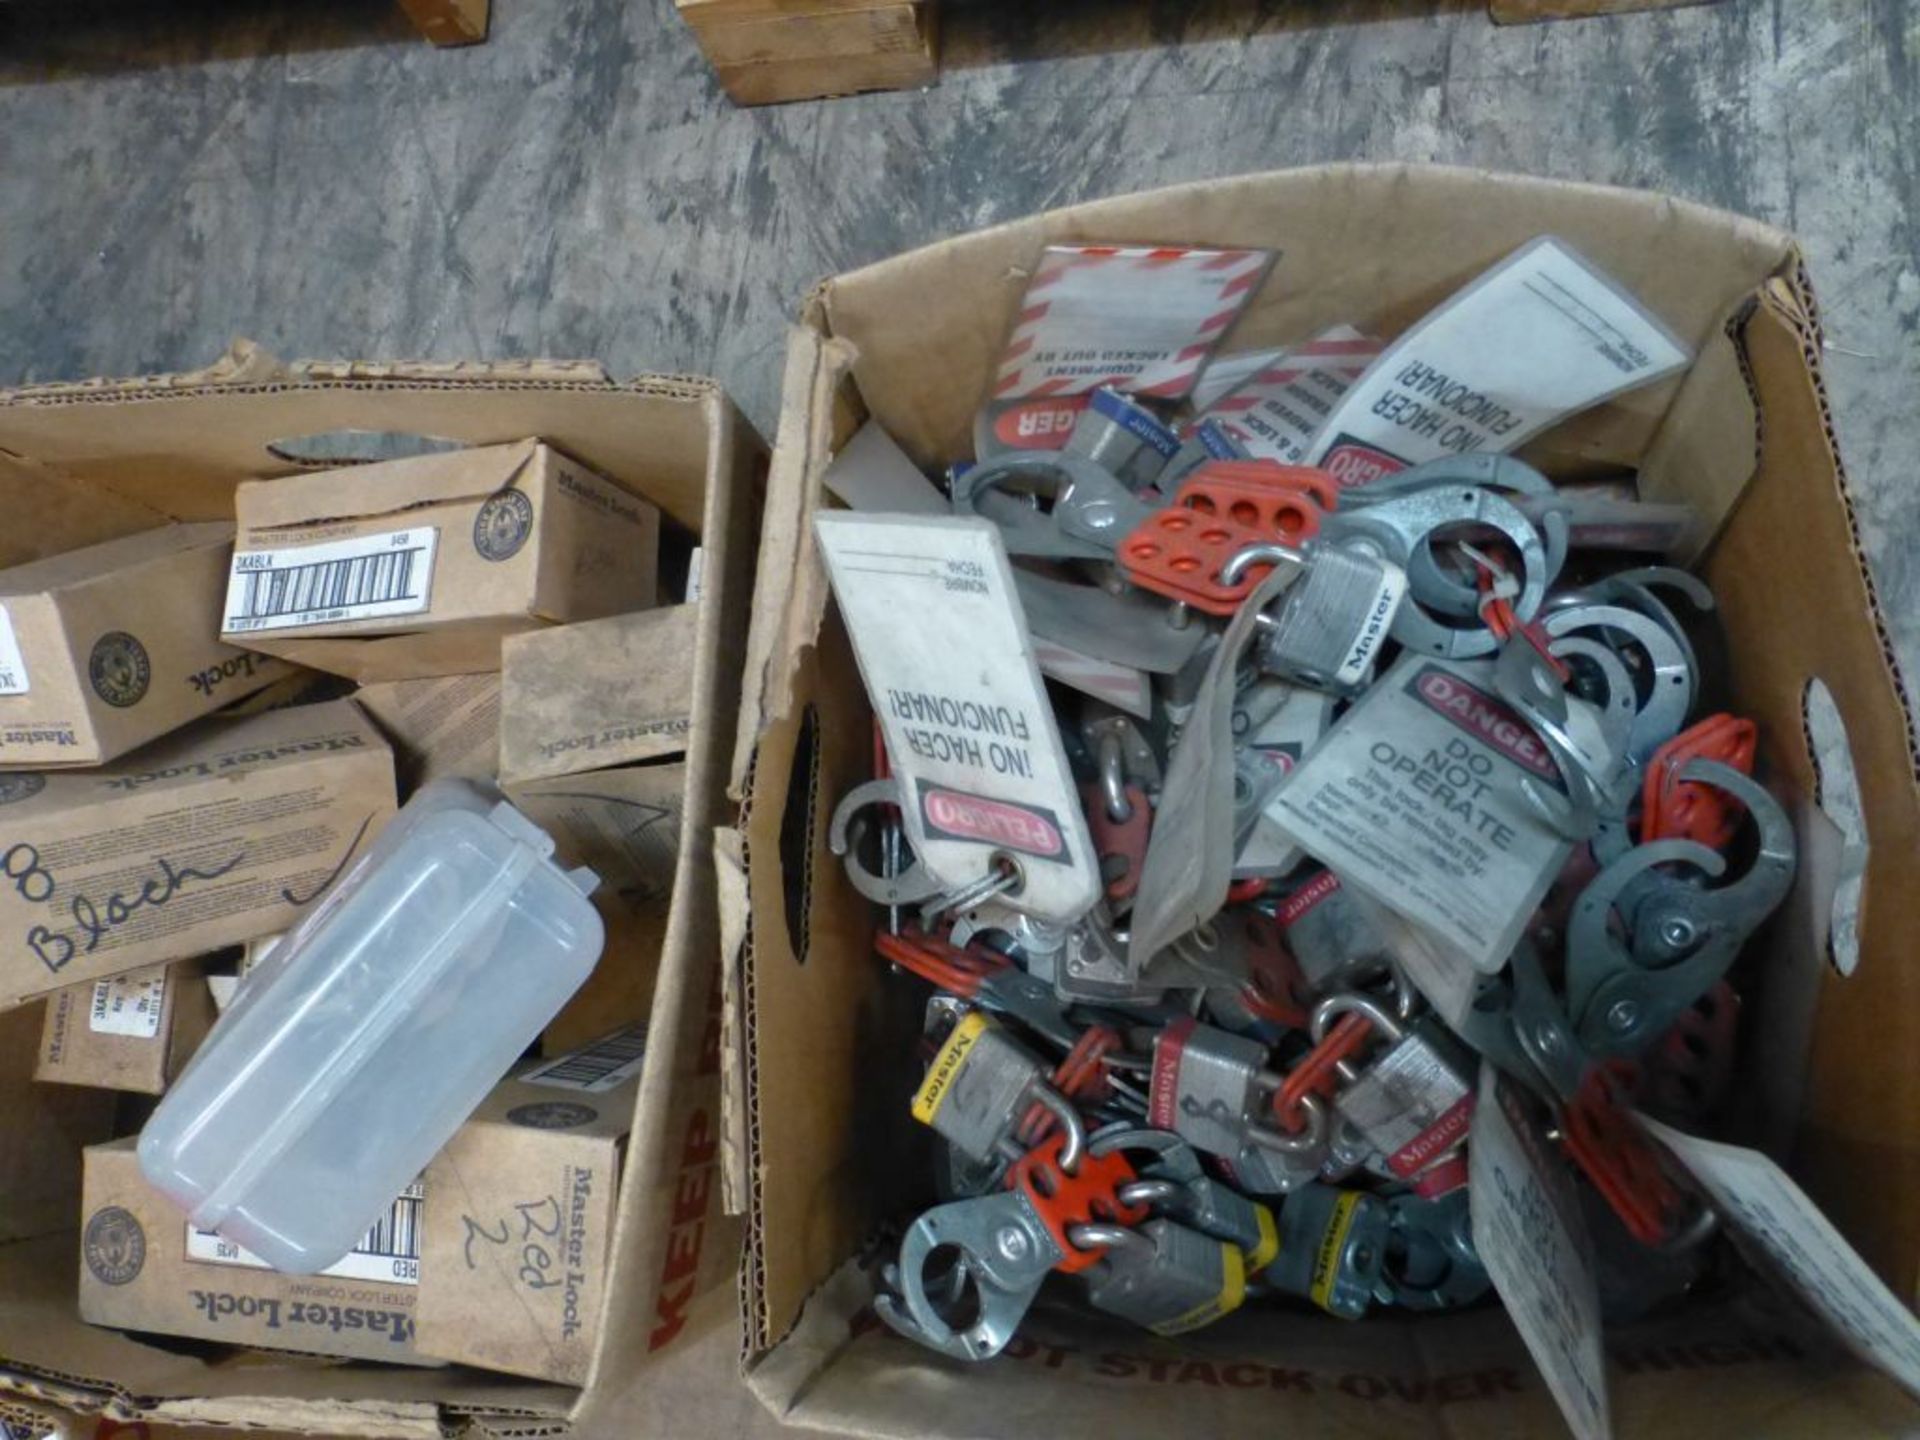 Lot of Assorted Masterlock Locks and Electrical Lockouts - Tag: 219557 - Image 7 of 8